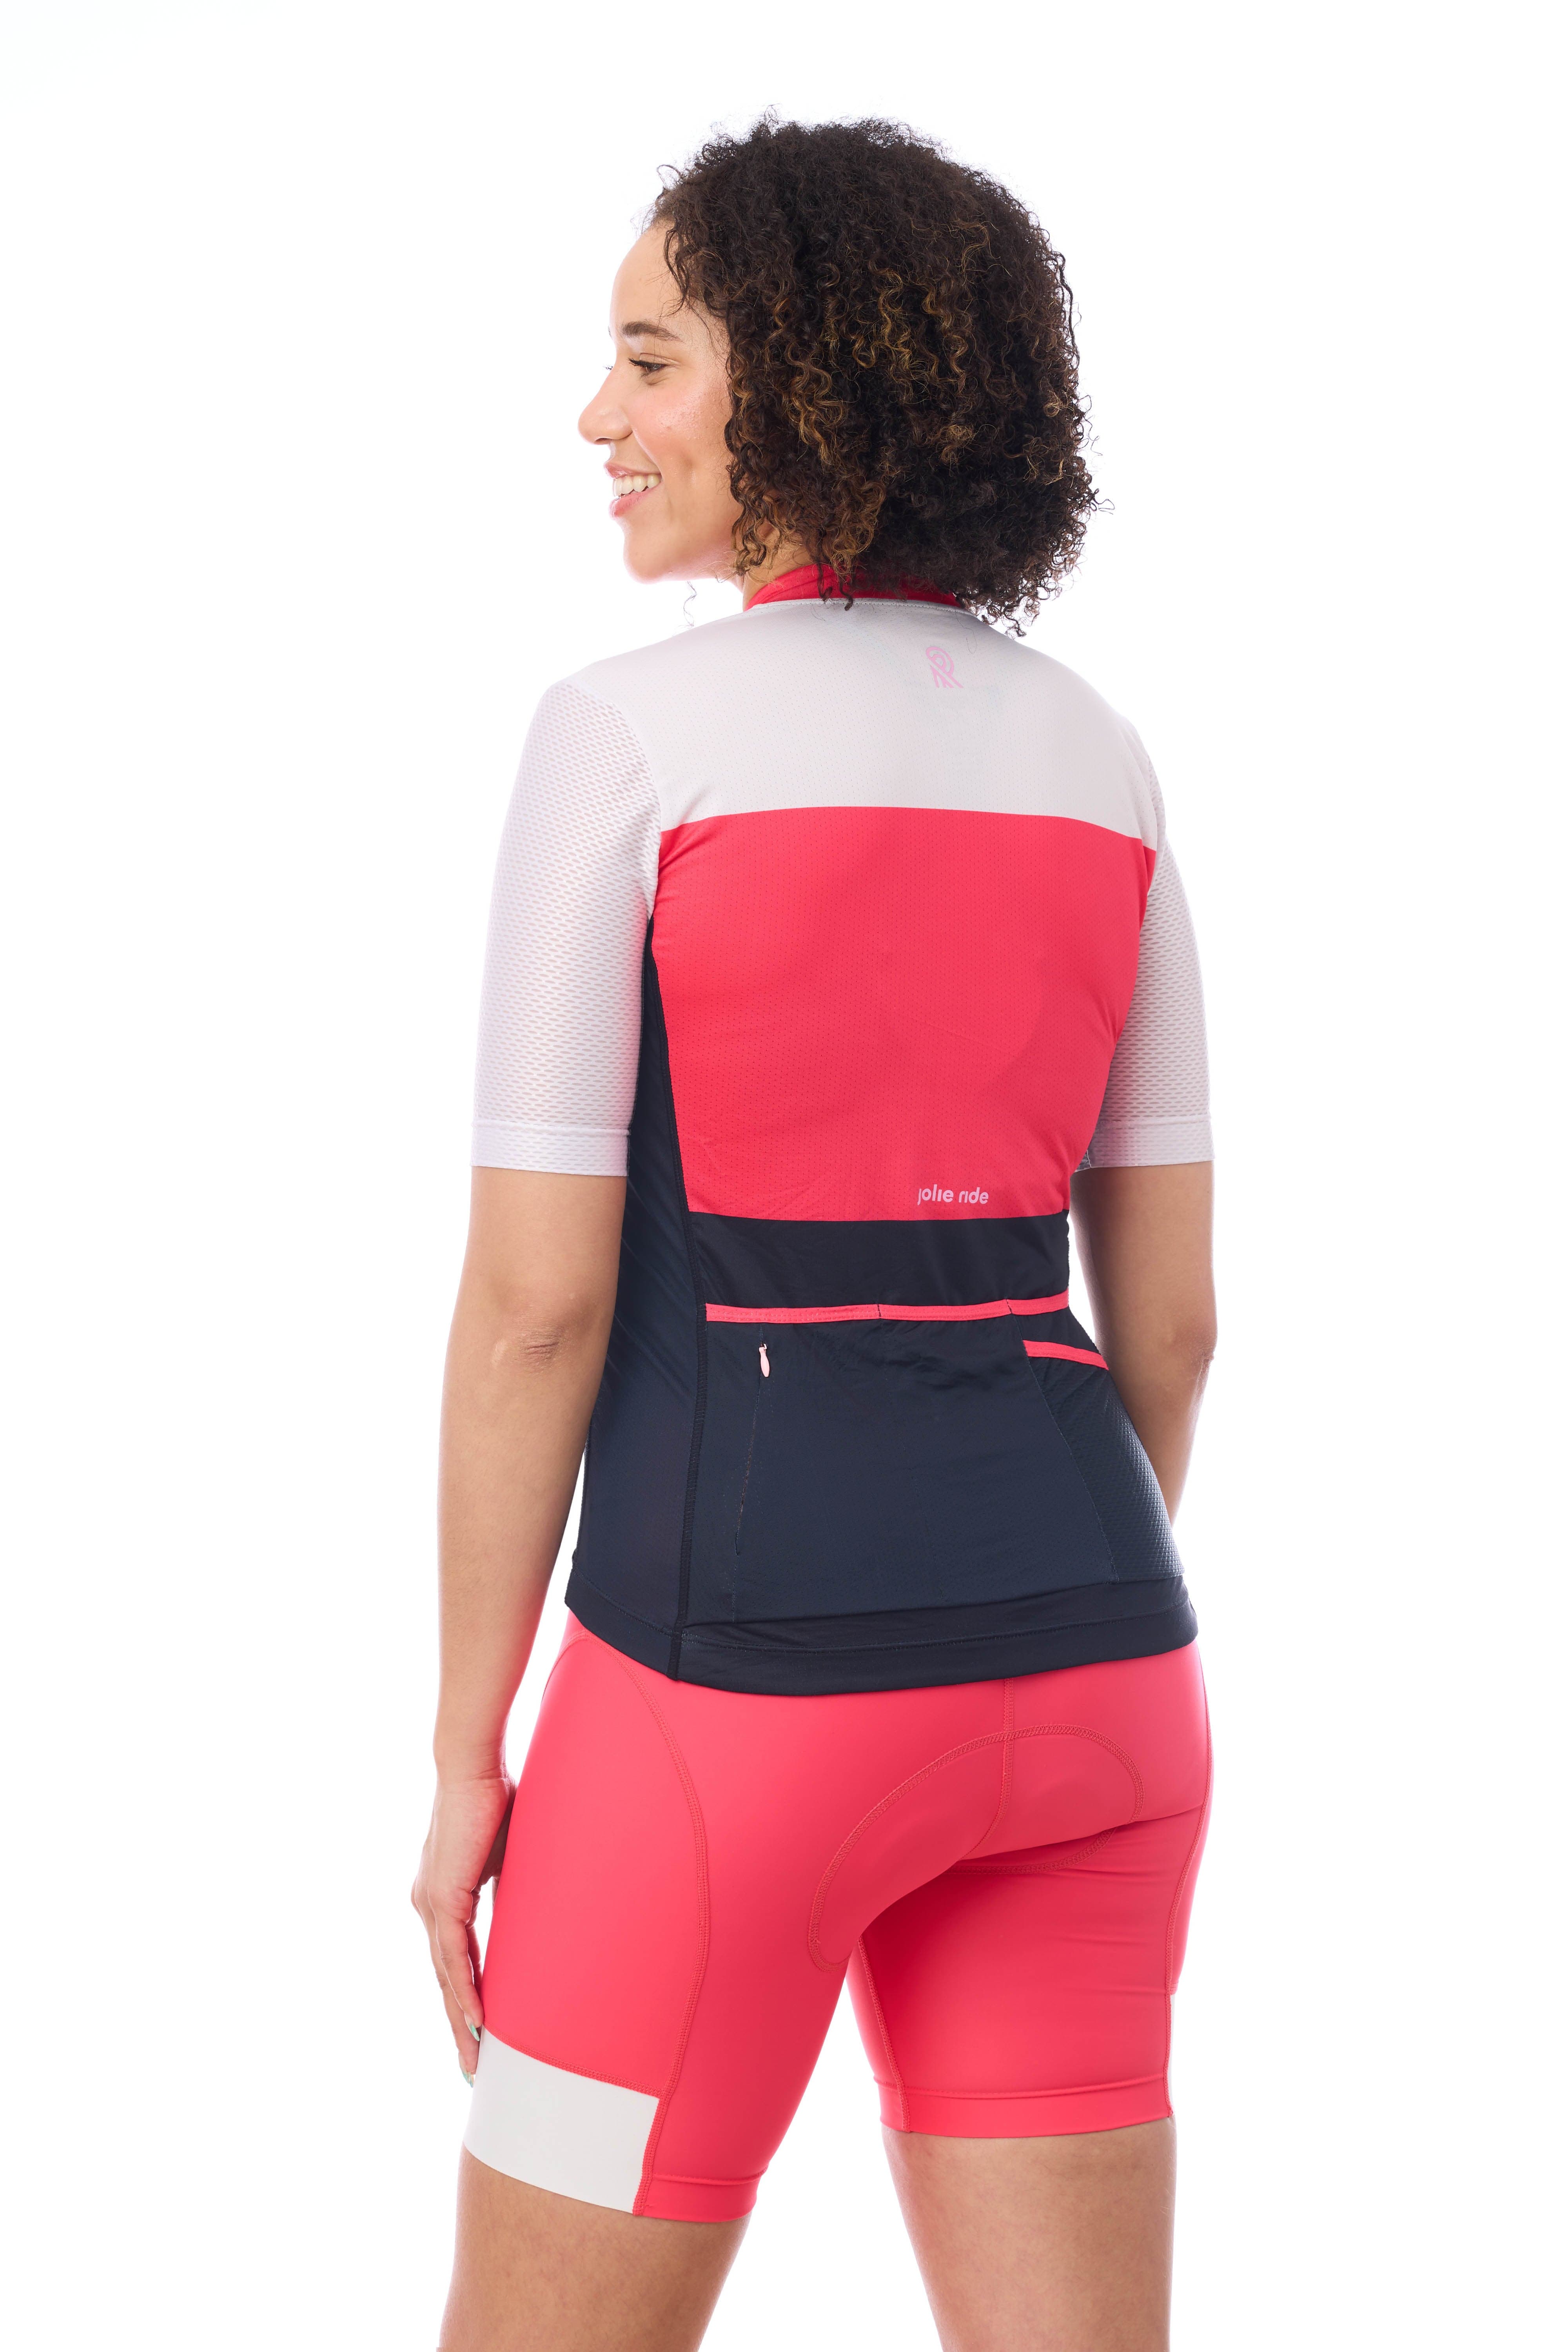 JolieRide Jersey women's colorblock cycling jersey with UV protection, breathability, and storage